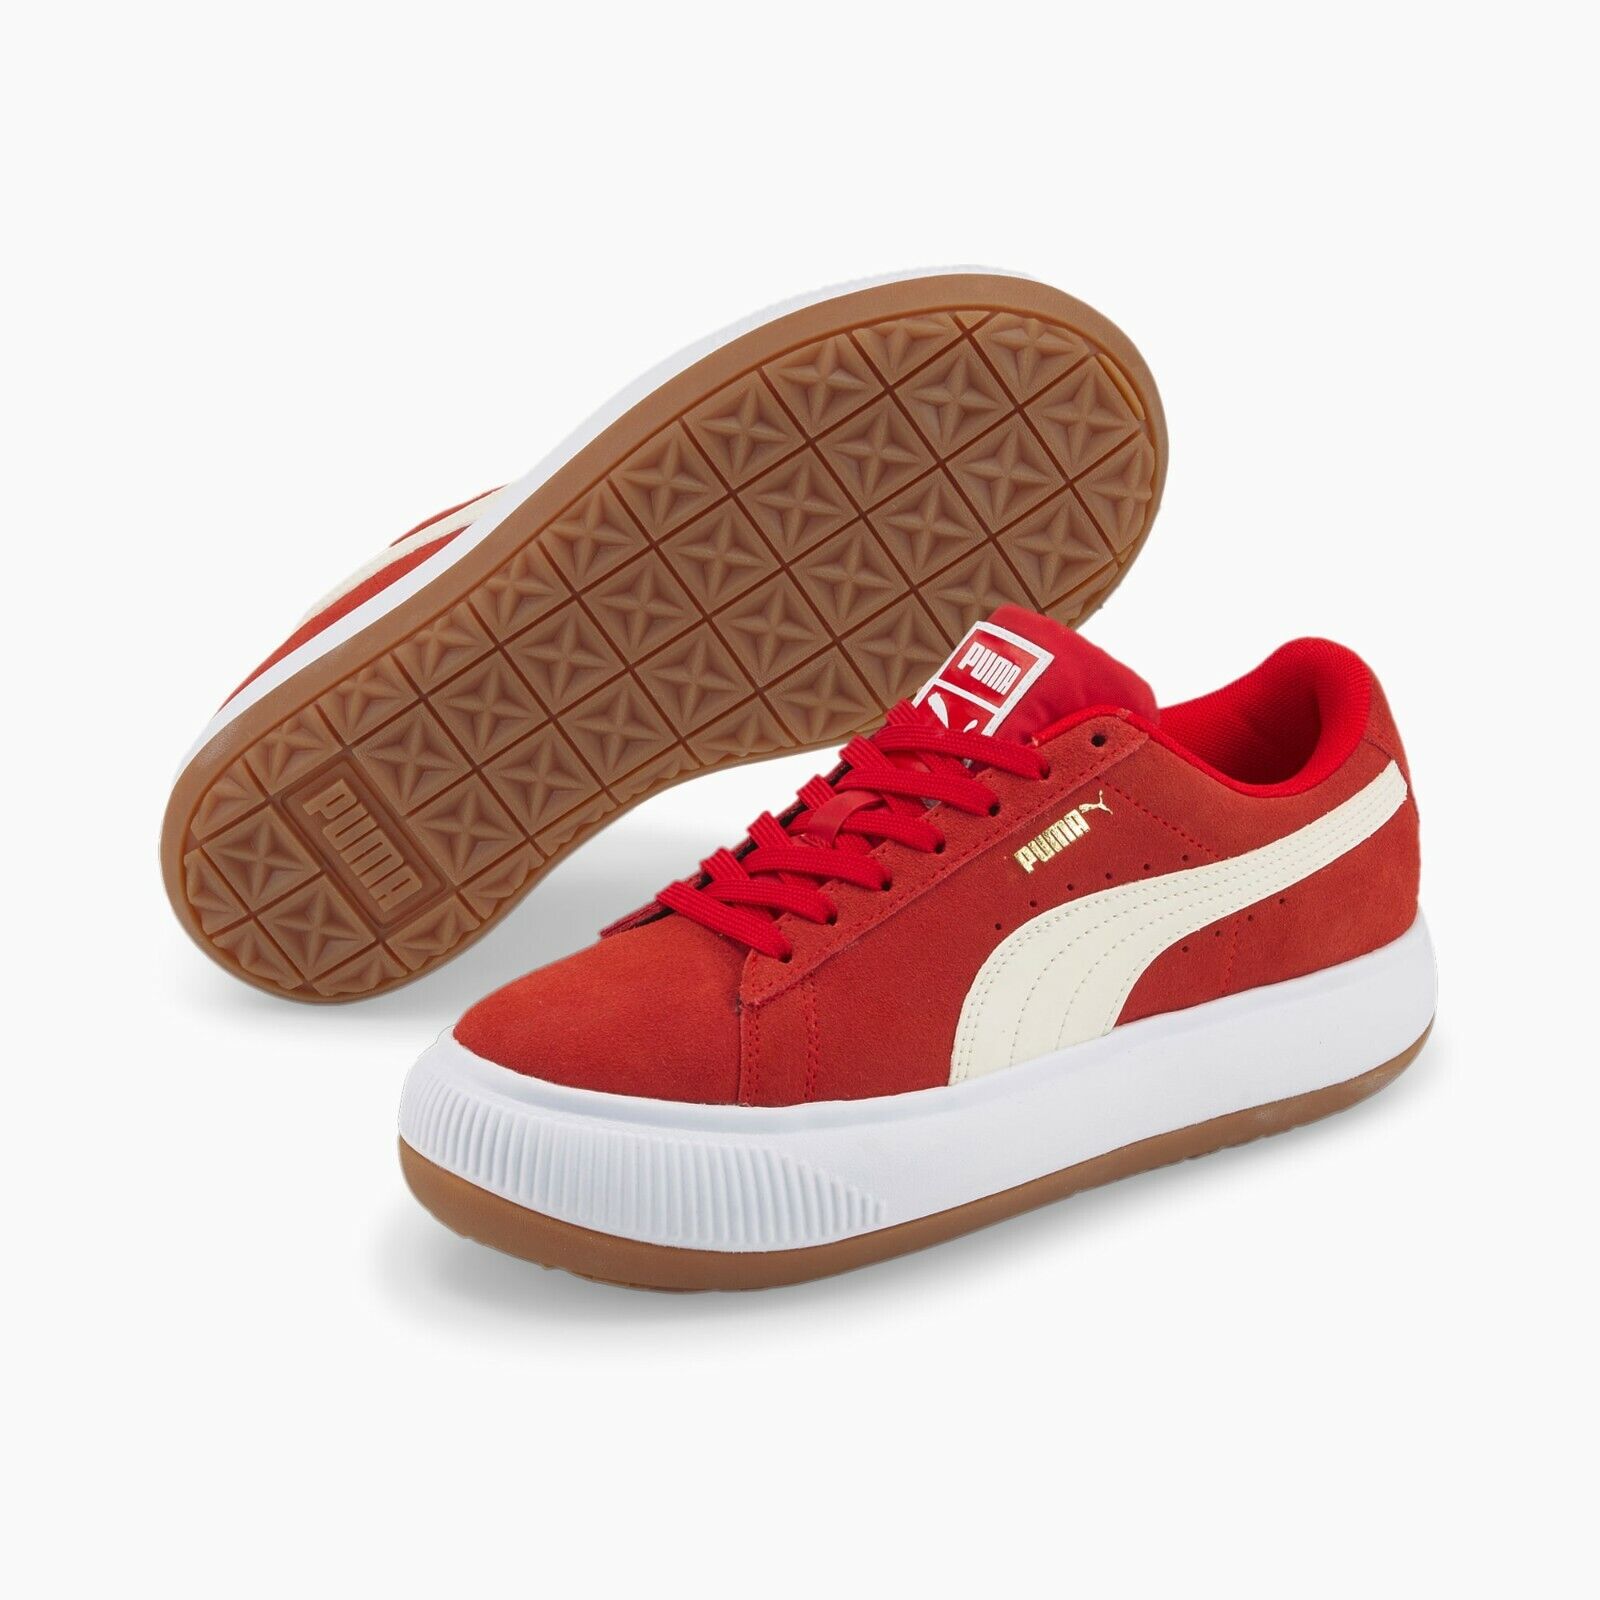 Puma Women's Suede Mayu Shoes LifeStyle Sneakers High Risk Red 380686-08 US  4-10